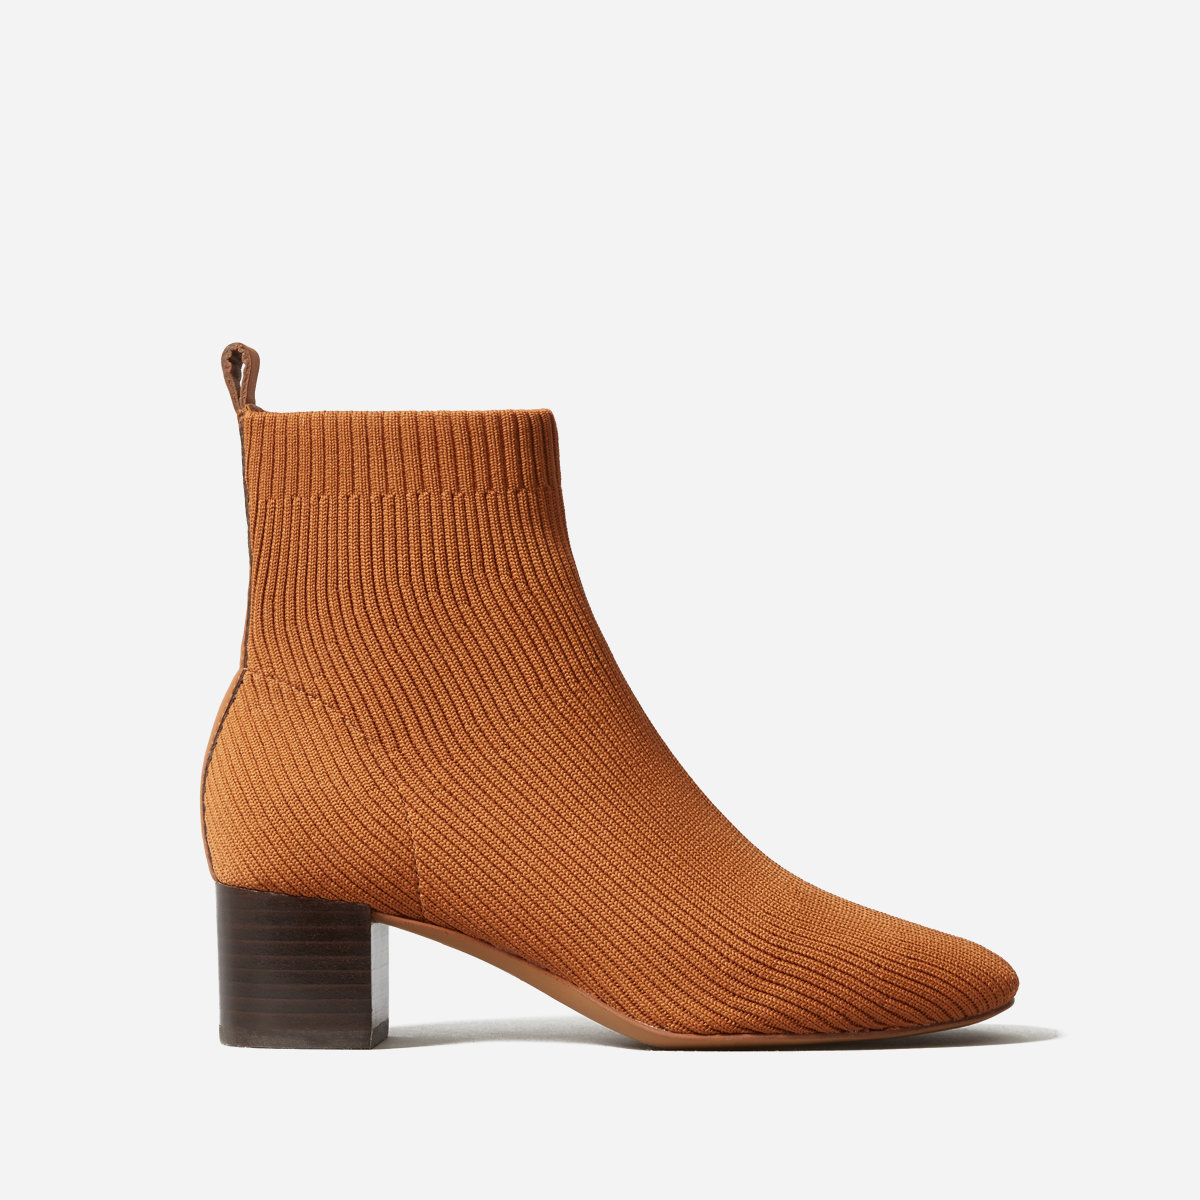 Everlane Glove ReKnit Day Boot in Toffee